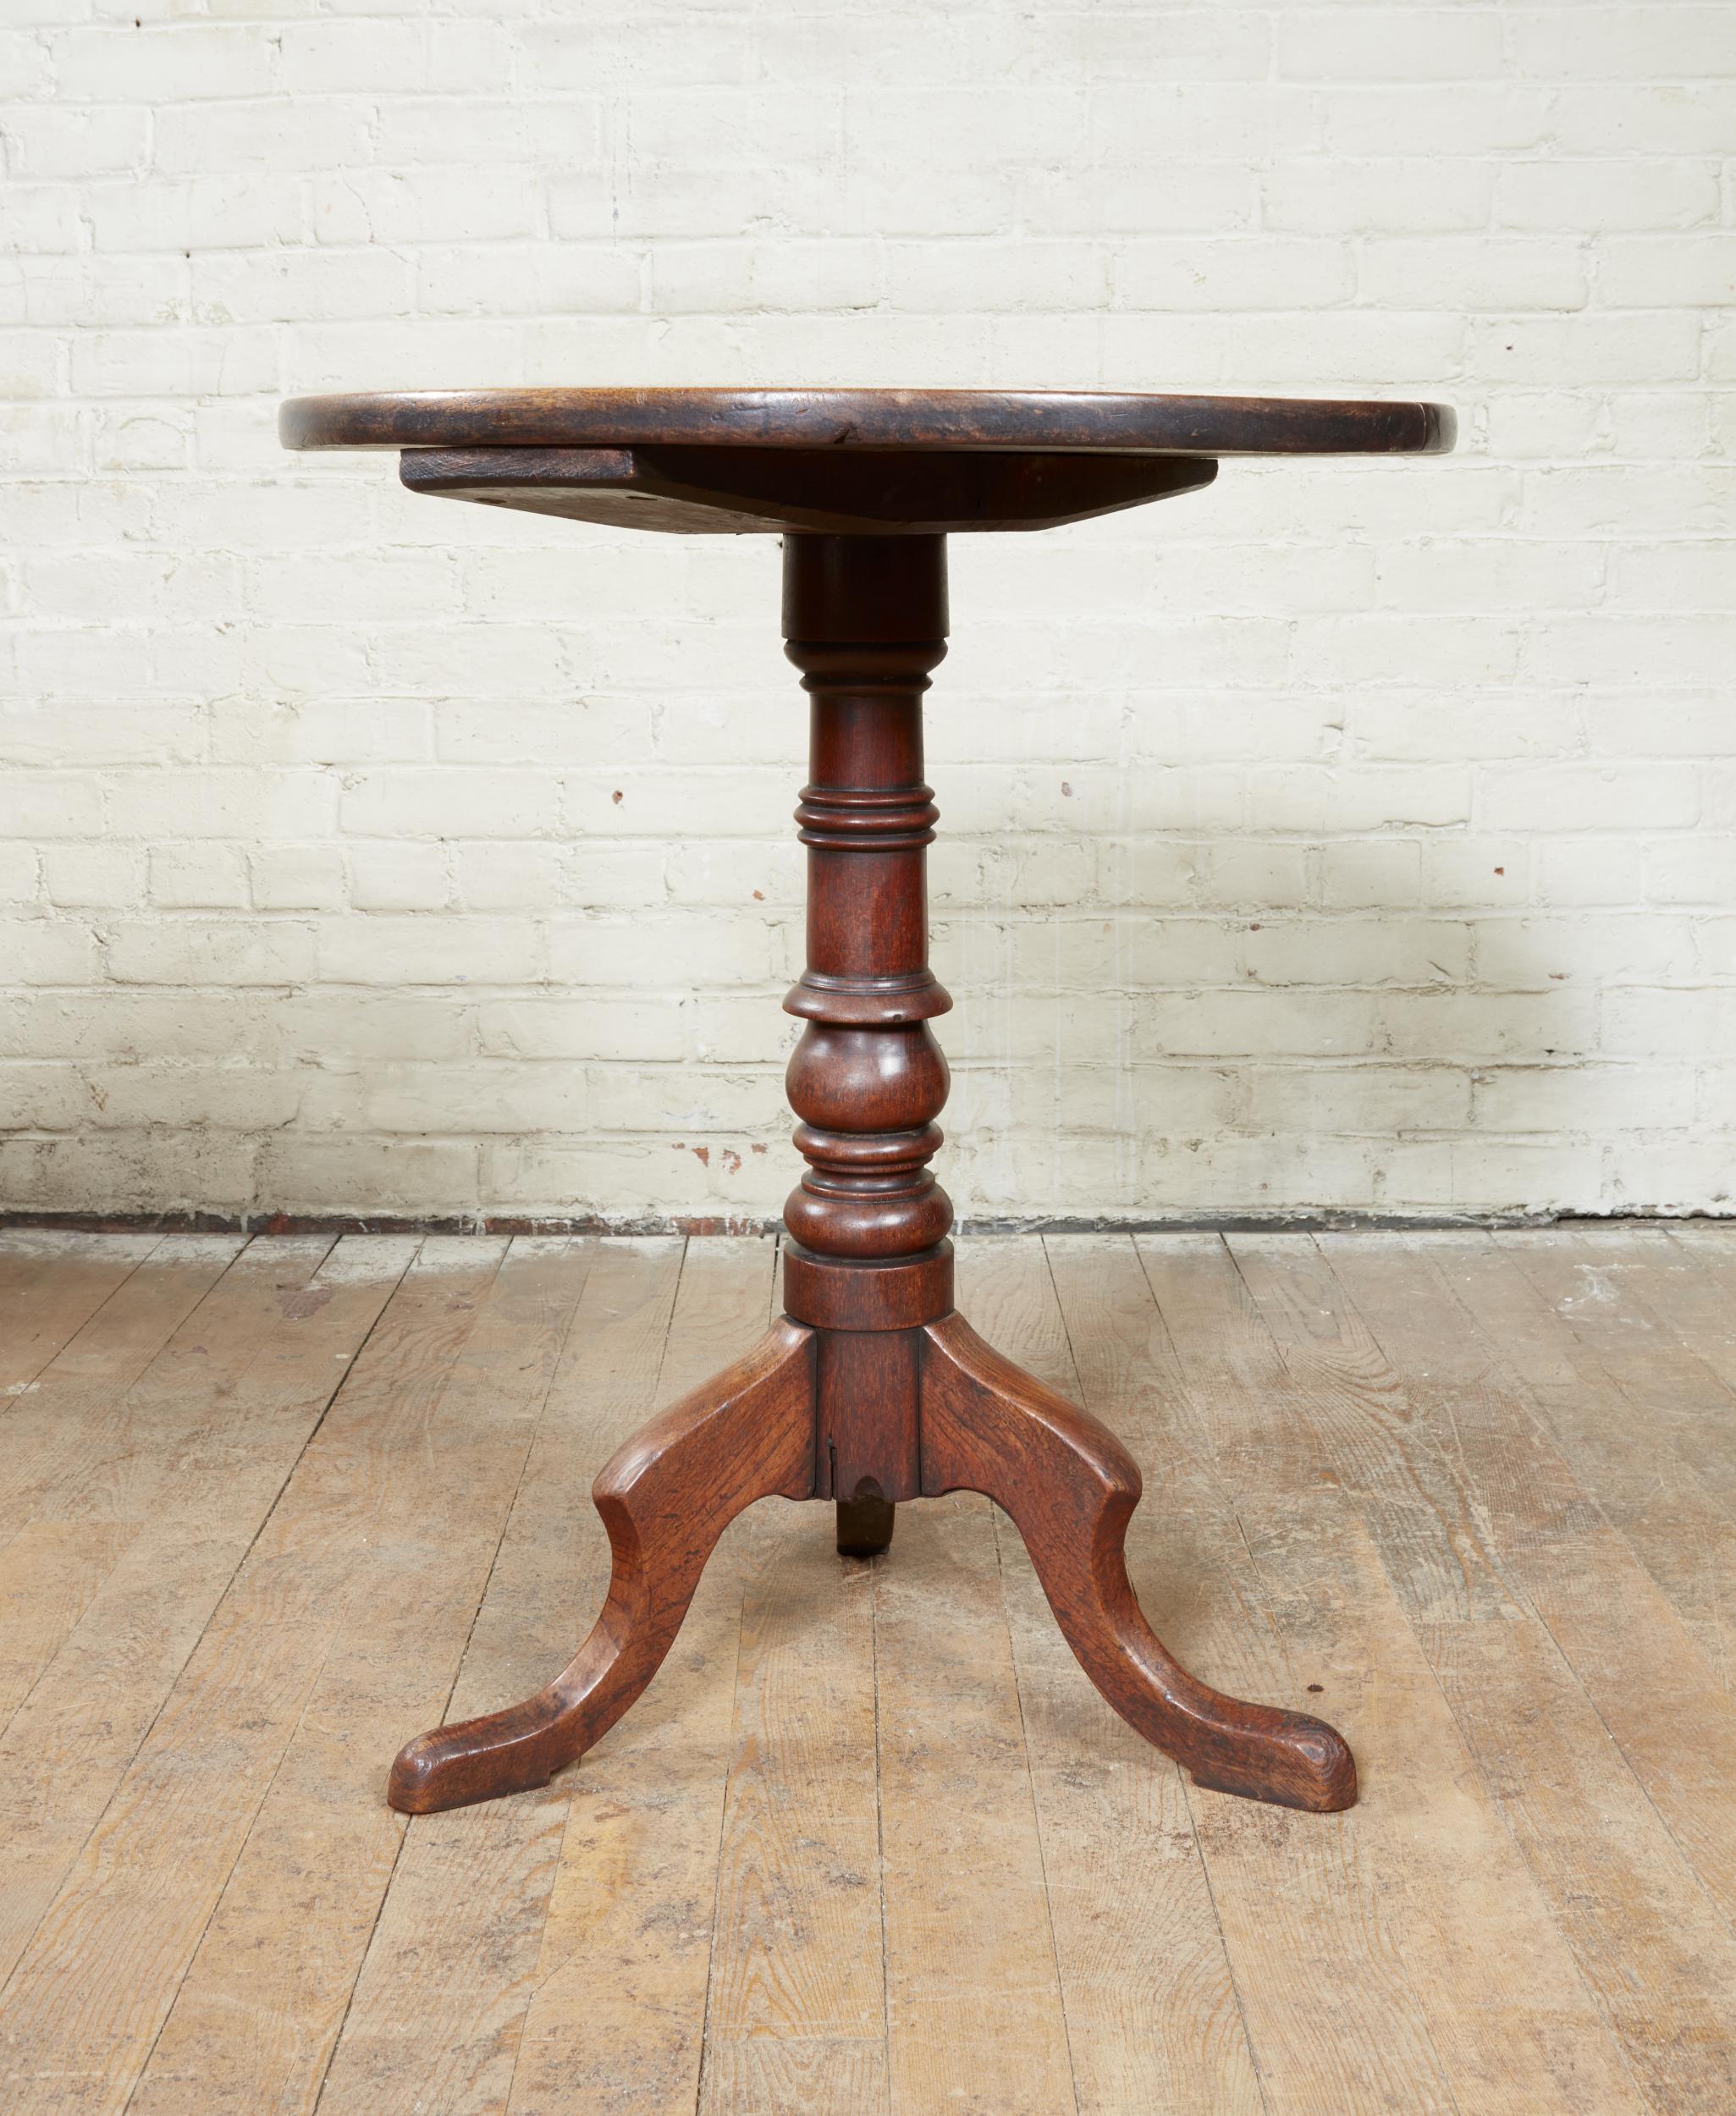 Good early 19th century English vernacular candlestand or wine table, the two plank top made from Thorn Acacia, a seldom seen timber in English (or any!) furniture, having simple rounded edge over turned shaft and standing on well shaped slipper